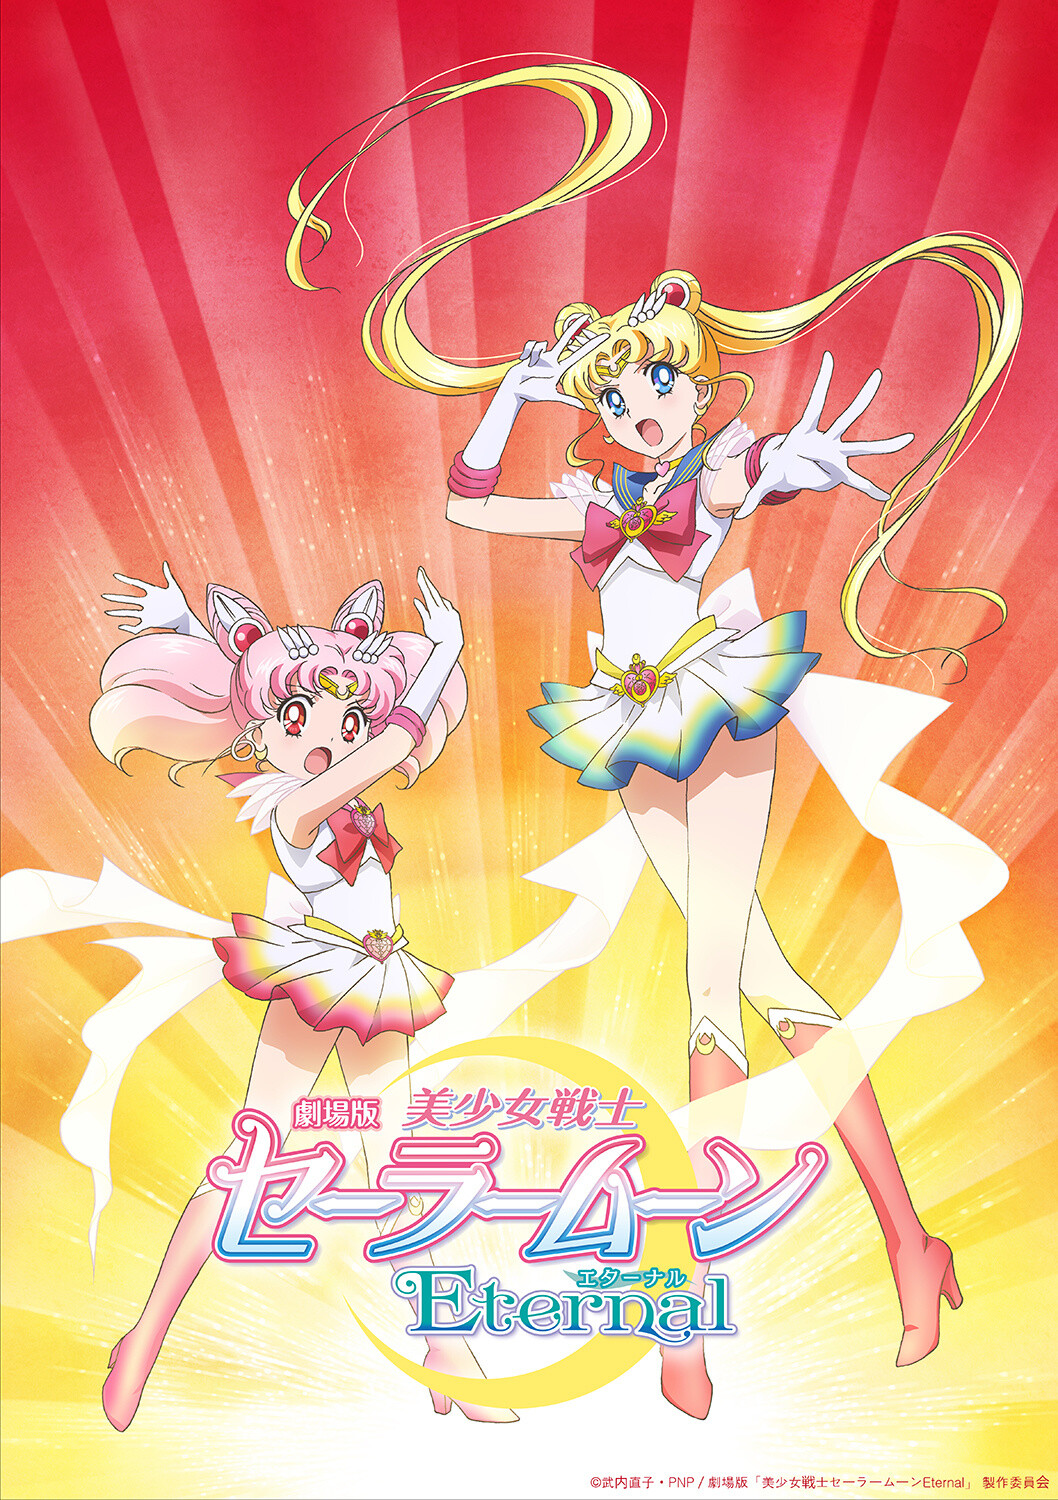 Sailor Moon to Get Two Part Movie For Season 4 in 2020! Anime News